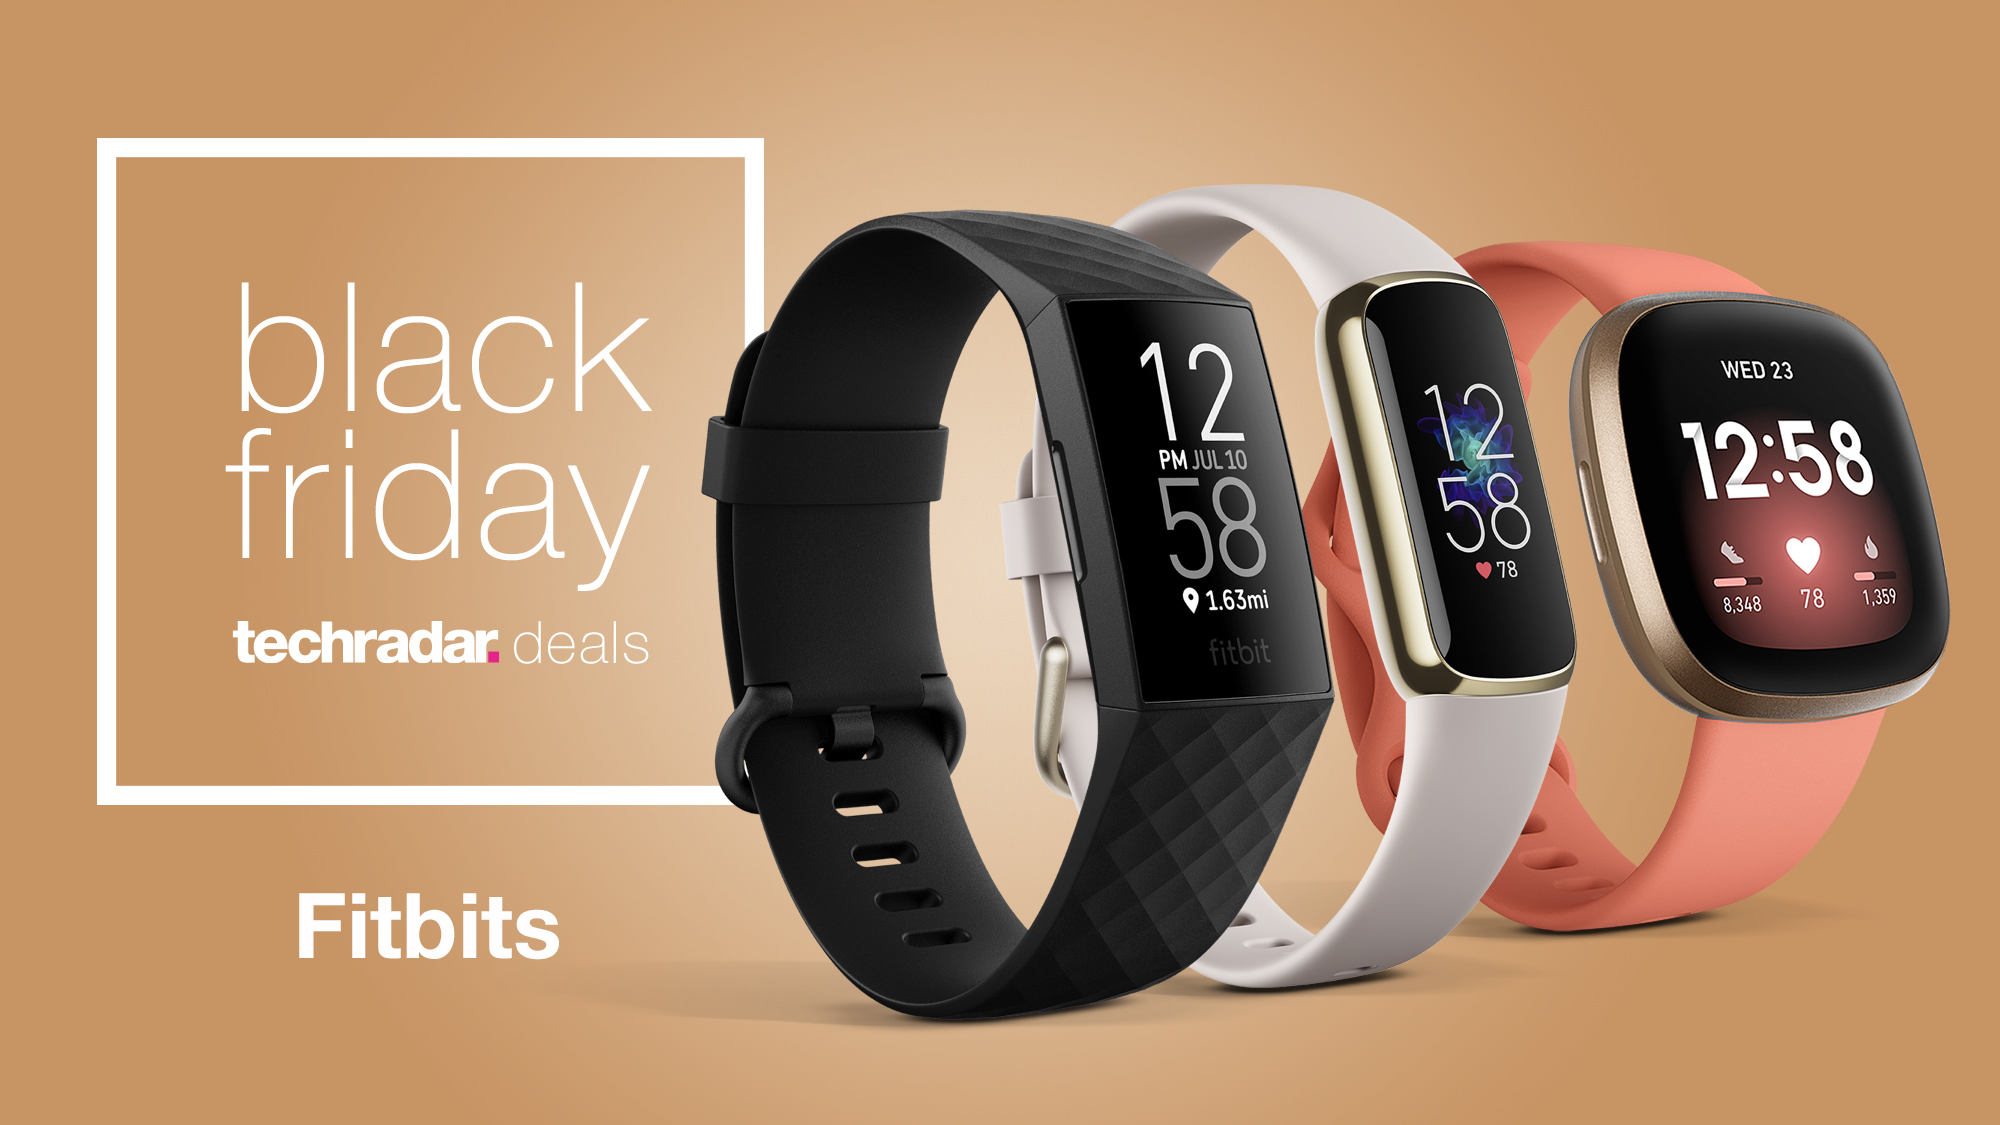 Best Black Friday Deal for Fitbit Acer 2 Barff Afters